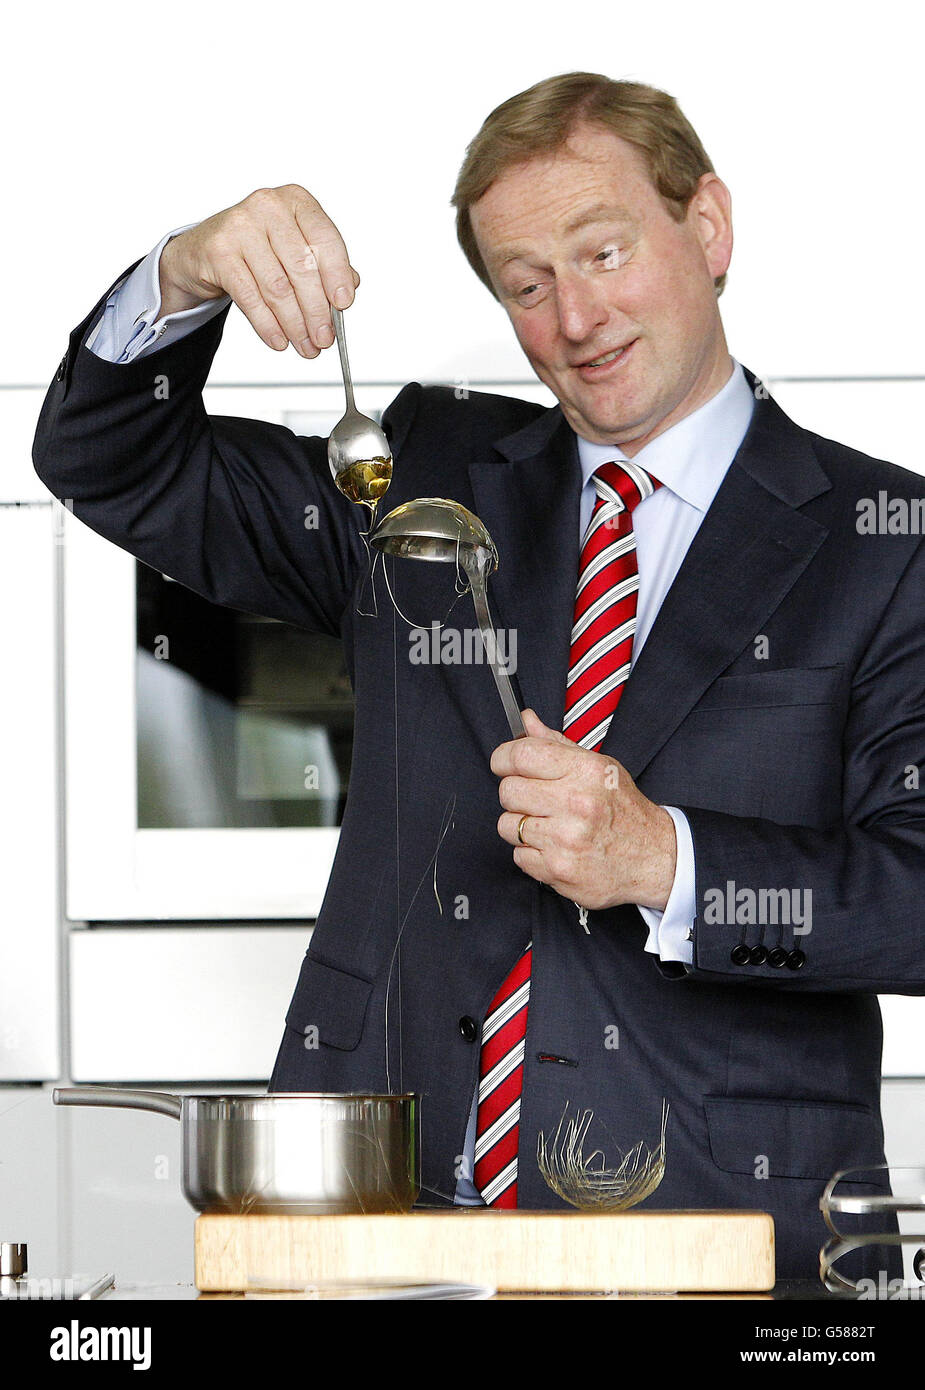 Taoiseach Enda Kenny drips melted sugar onto a spoon to make a sugar basket on the Bord Bia stand at the Bord Bia Bloom festival in the Phoenix Park, Dublin as the counting in the Fiscal Stability Referendum continues. Stock Photo